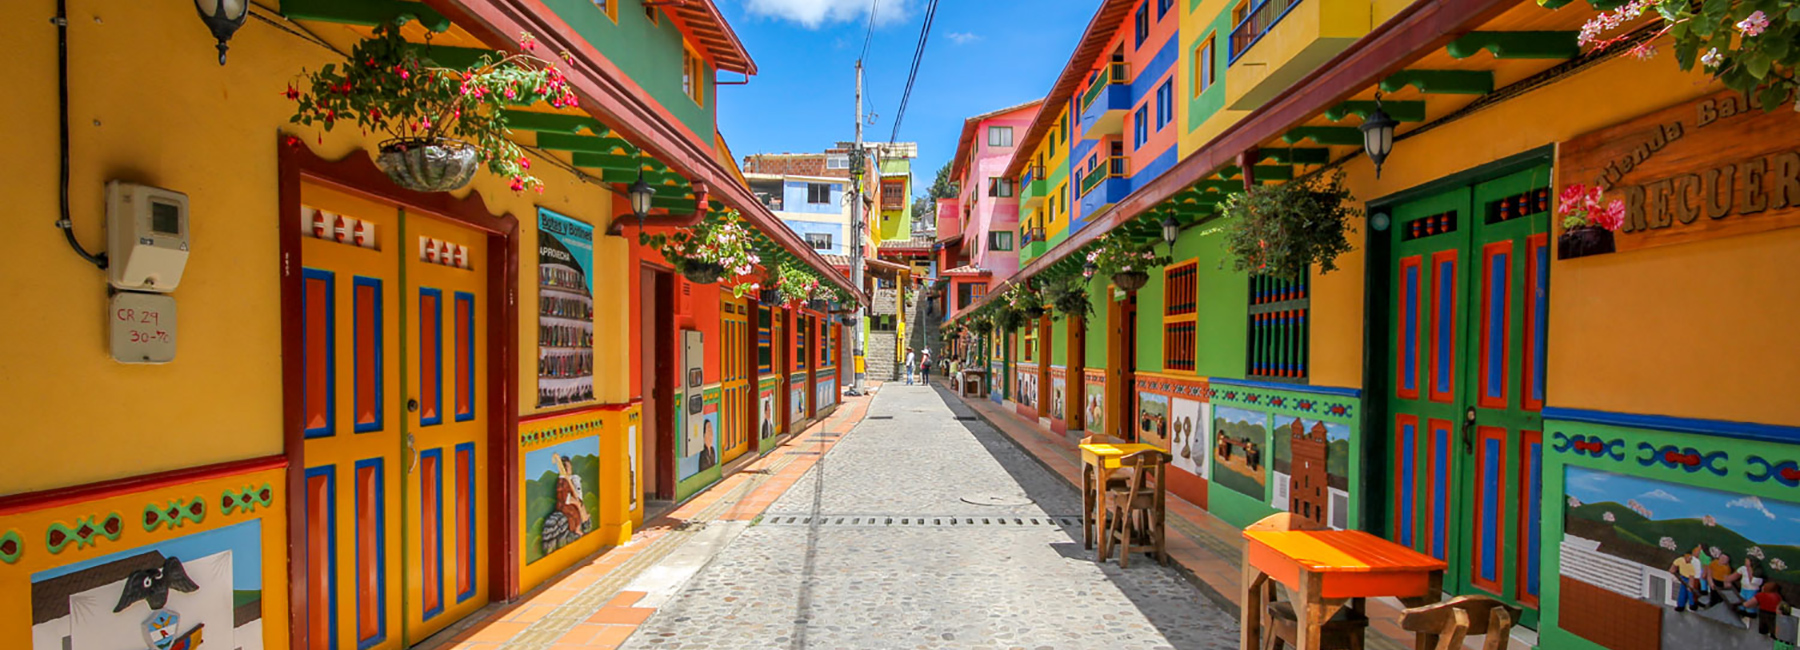 jessica devnani's saturated streetscapes capture colombia's colorful town of guatapé